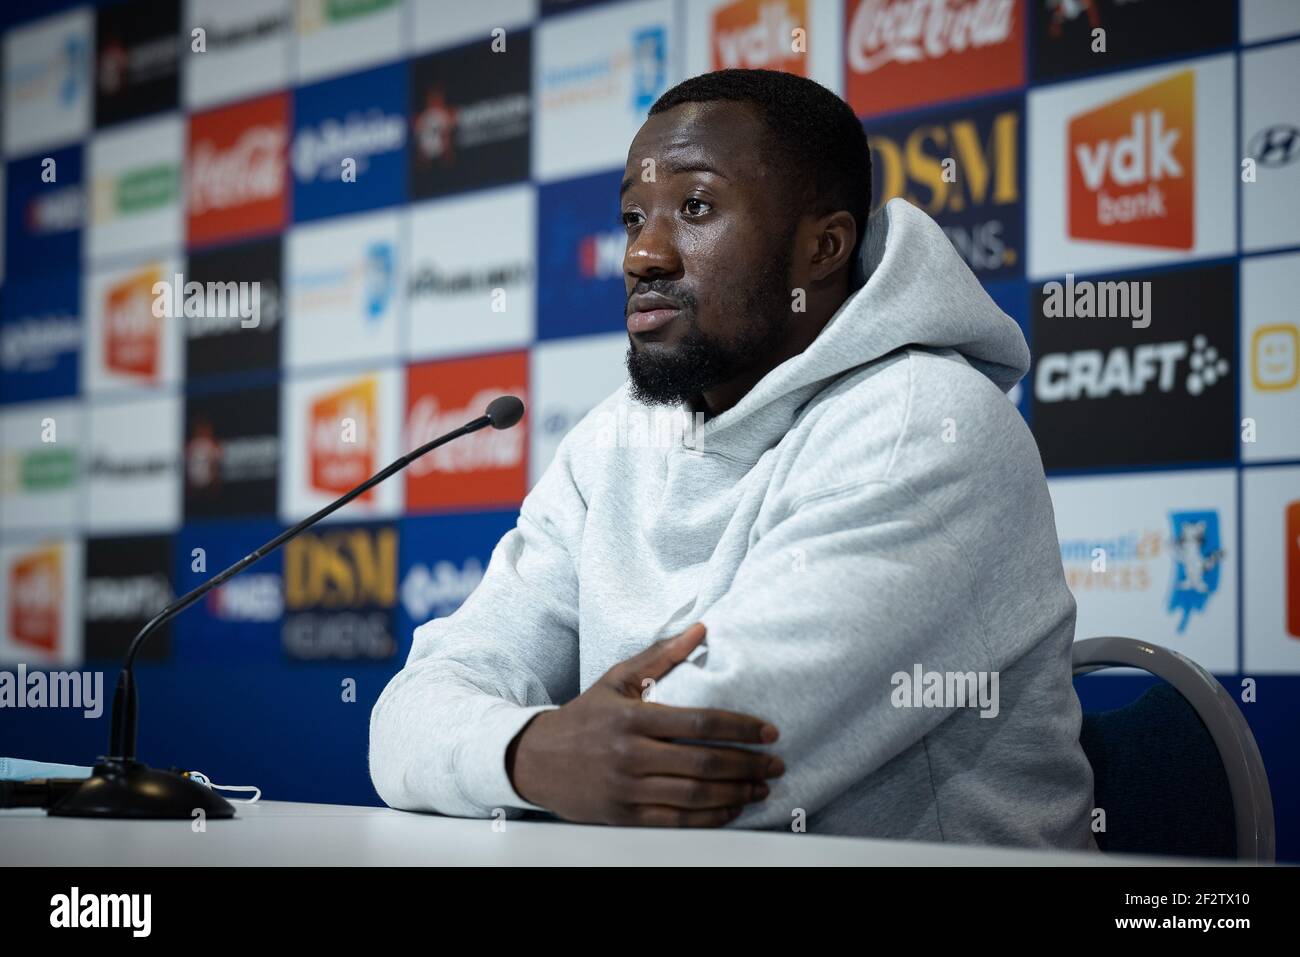 Gent's Elisha Owusu pictured during a press conference of Belgian soccer team KAA Gent, Saturday 13 March 2021 in Gent, ahead of Monday's postponed ma Stock Photo